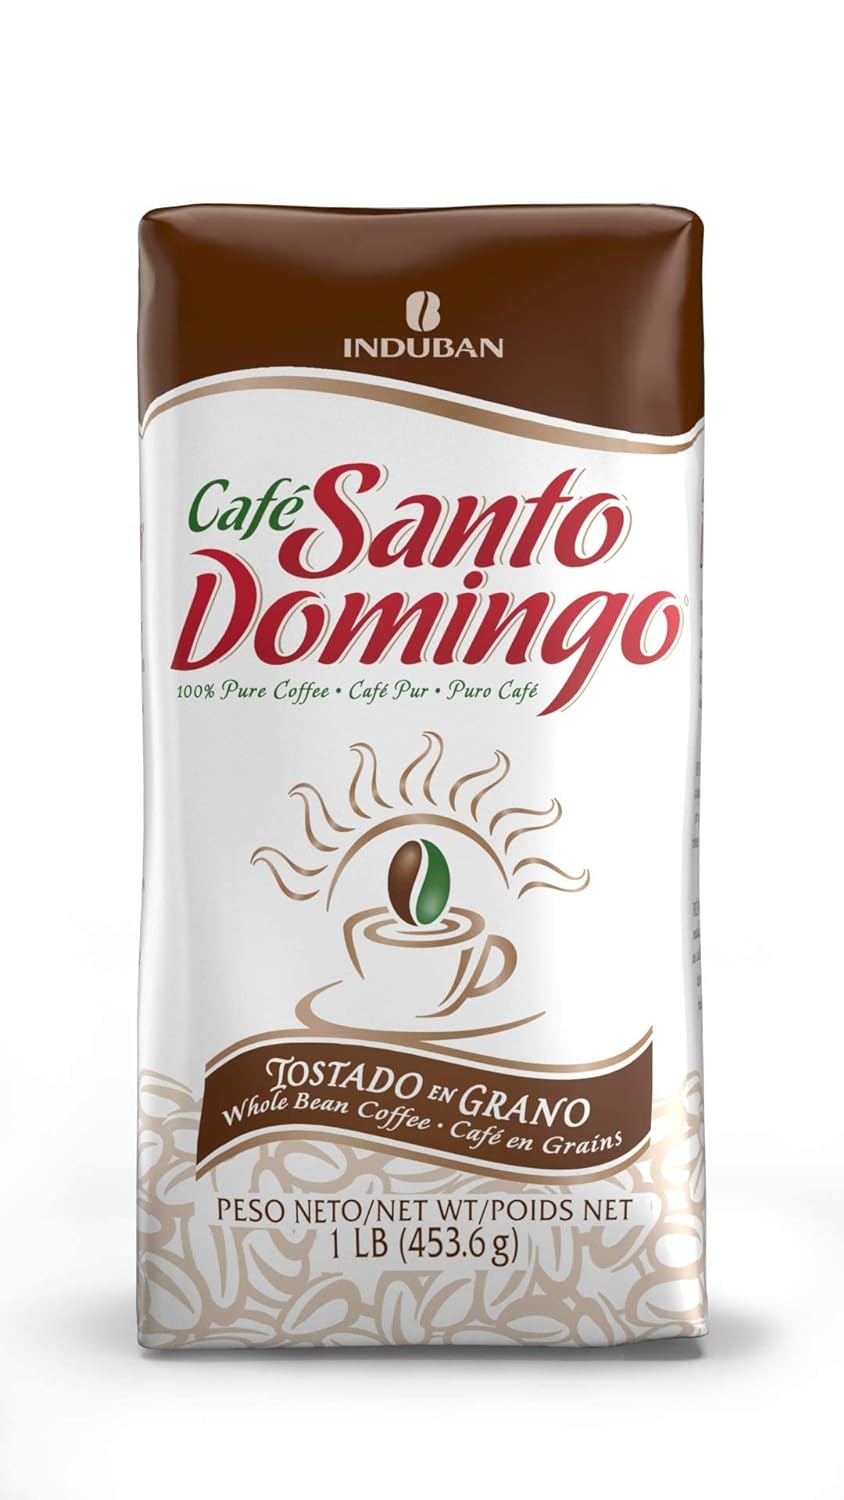 Santo Domingo Coffee, 16 oz Bag, Whole Bean Coffee, Medium Roast - Product from the Dominican Republic (Pack of 1)